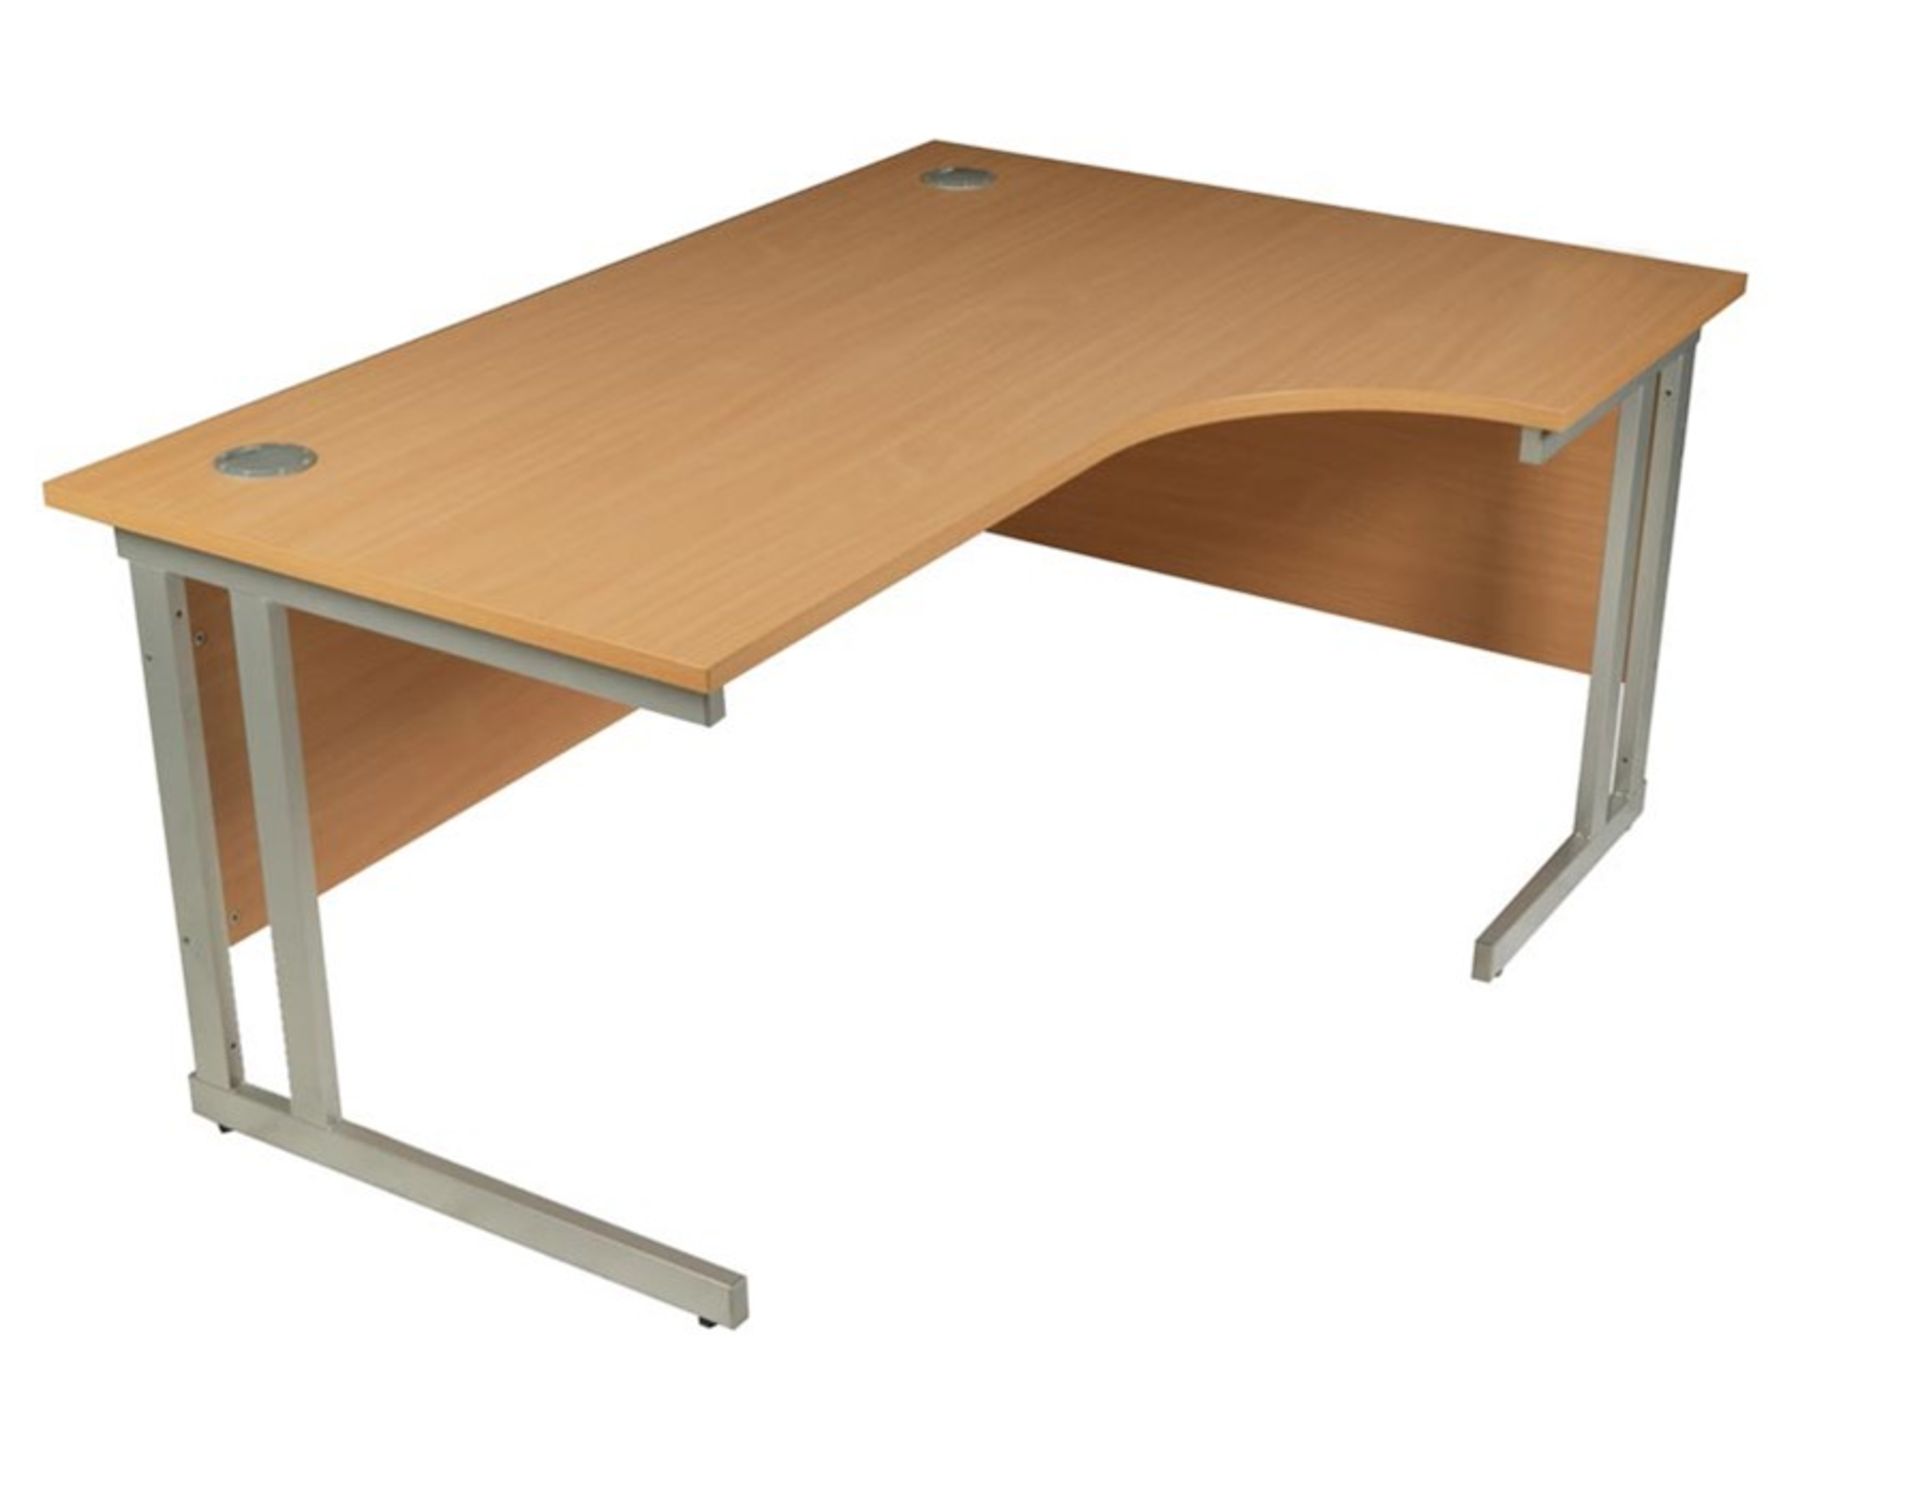 1 GRADE B PACKAGED L SHAPED CORNER OFFICE DESK / RRP £178.00 (VIEWING HIGHLY RECOMMENDED)